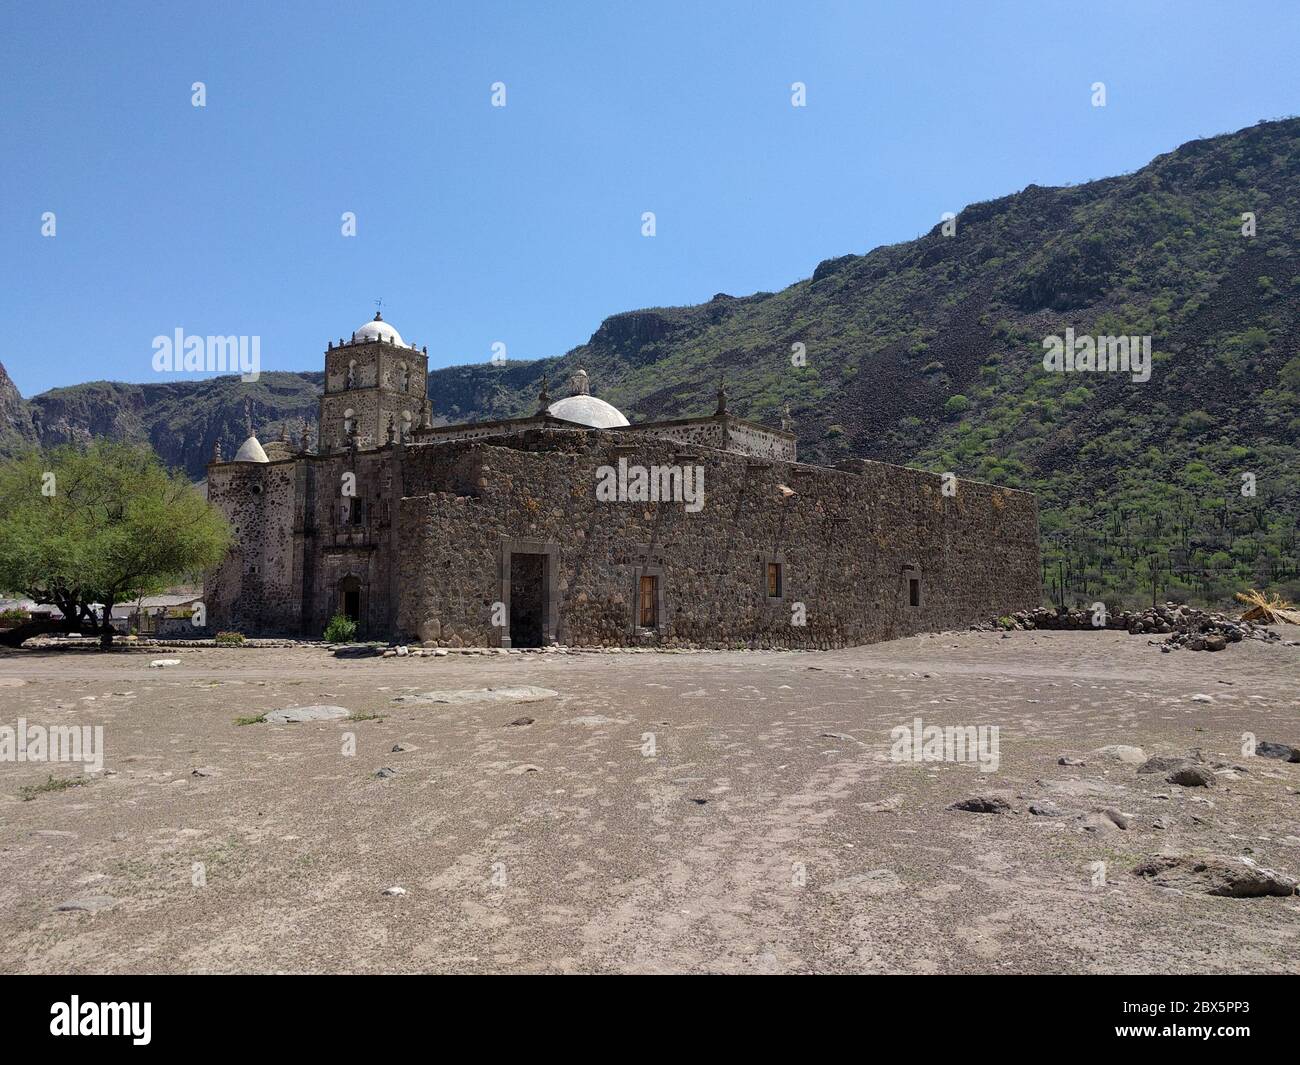 Mision San Francisco Javier, Baja California, Mexico. The old Spanish mission abandoned in 1817 but surviving as a local church still in use. Stock Photo